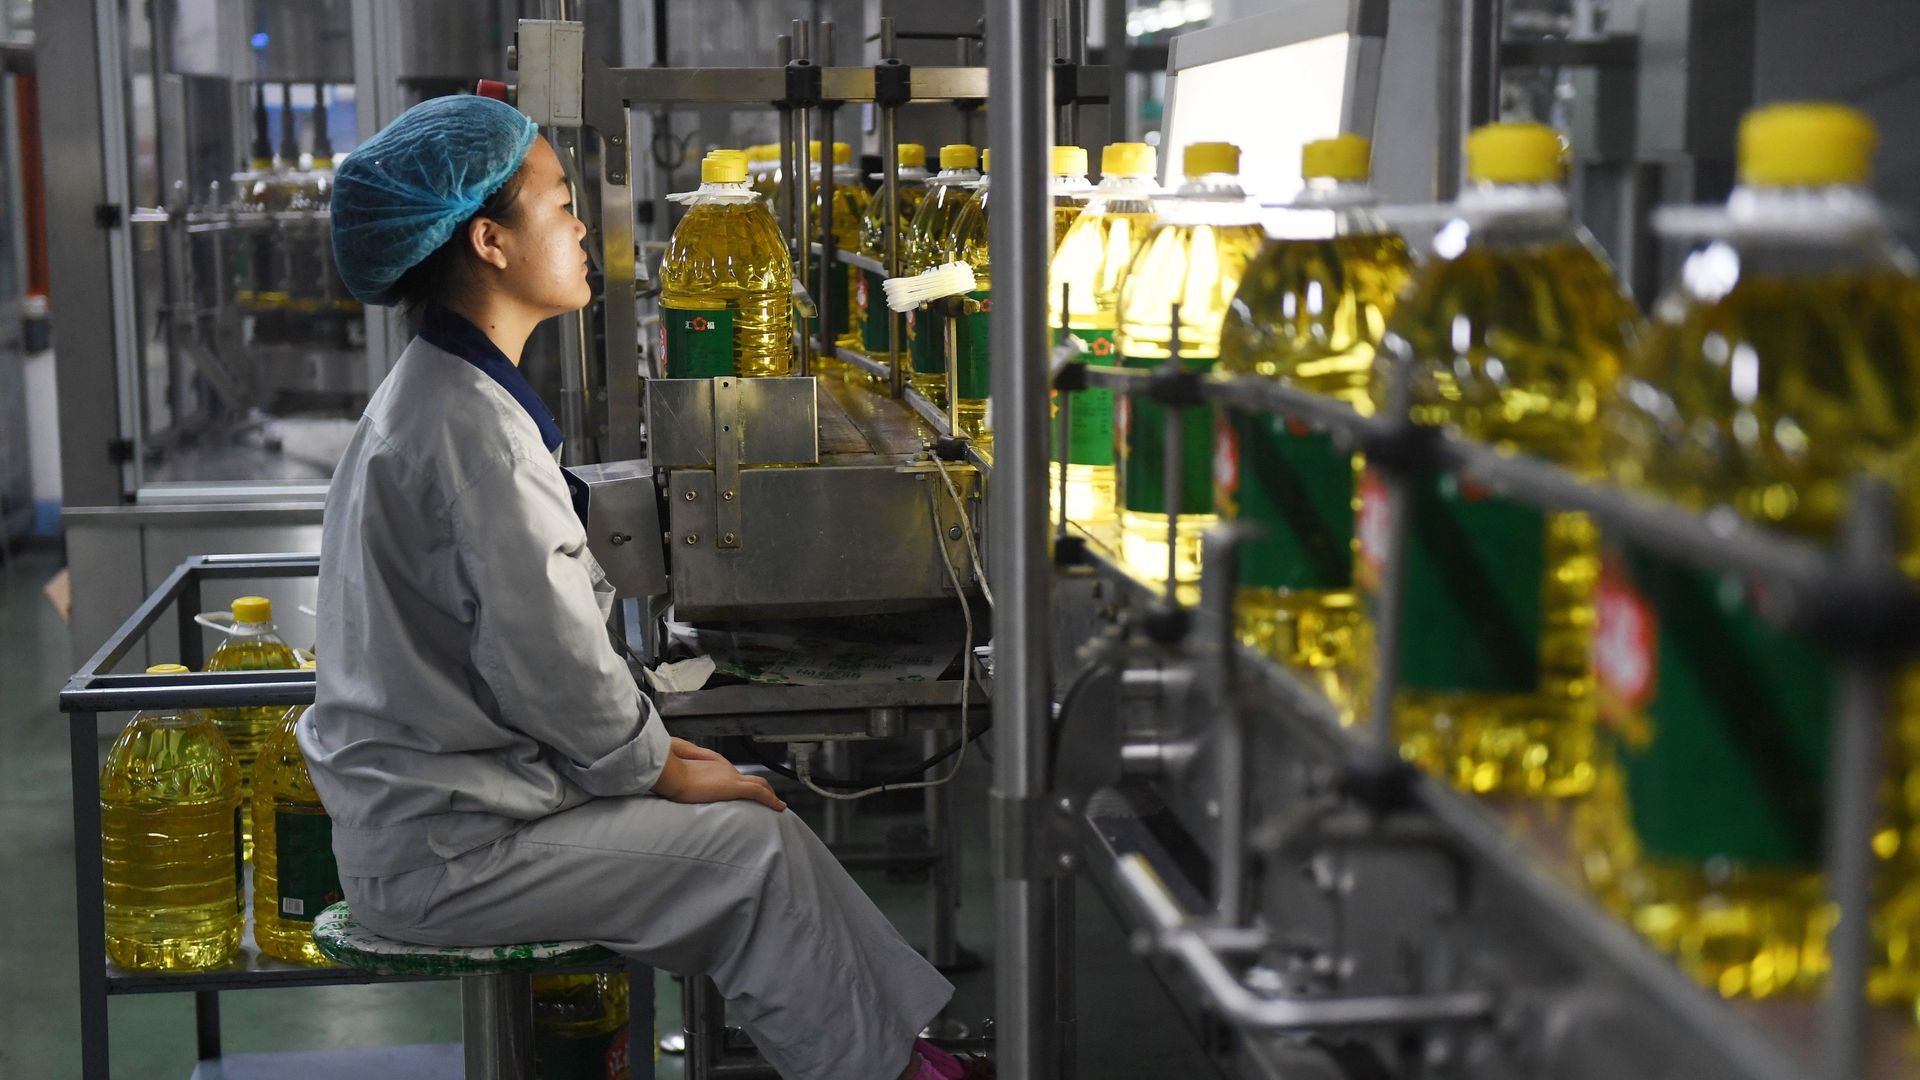 A worker monitors soybean oil production at a factory in northern China.